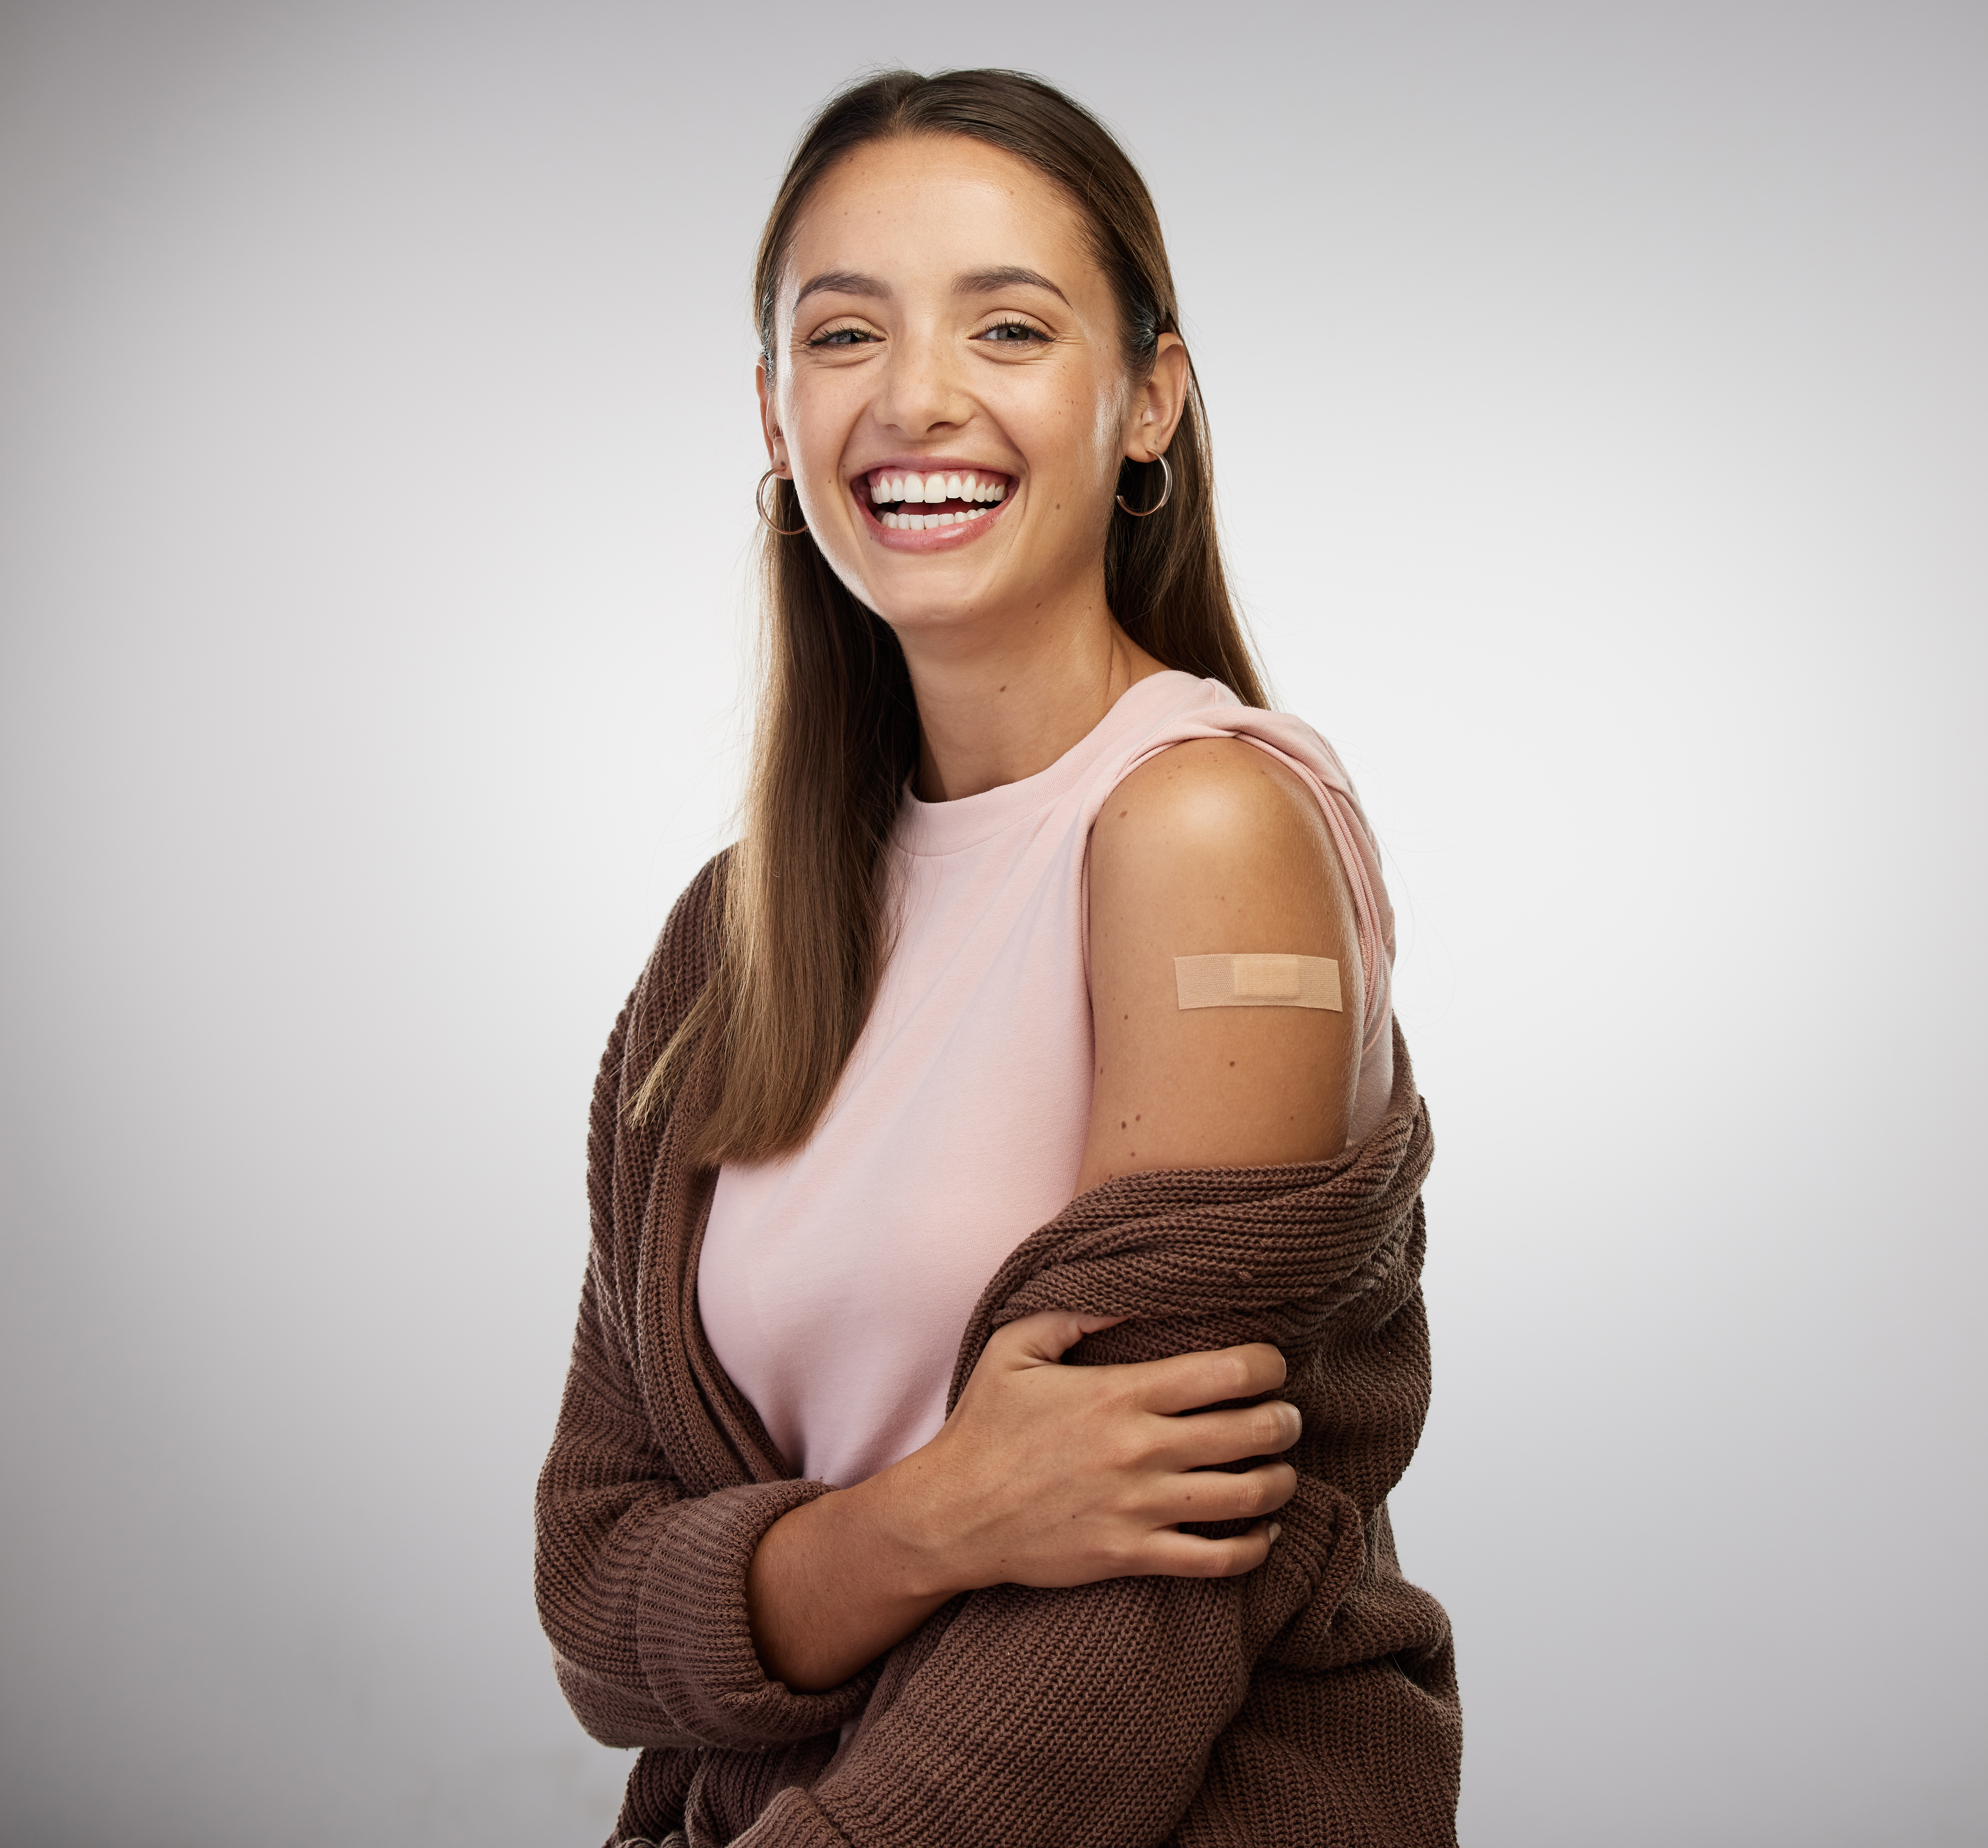 Woman showing off her vaccination bandage